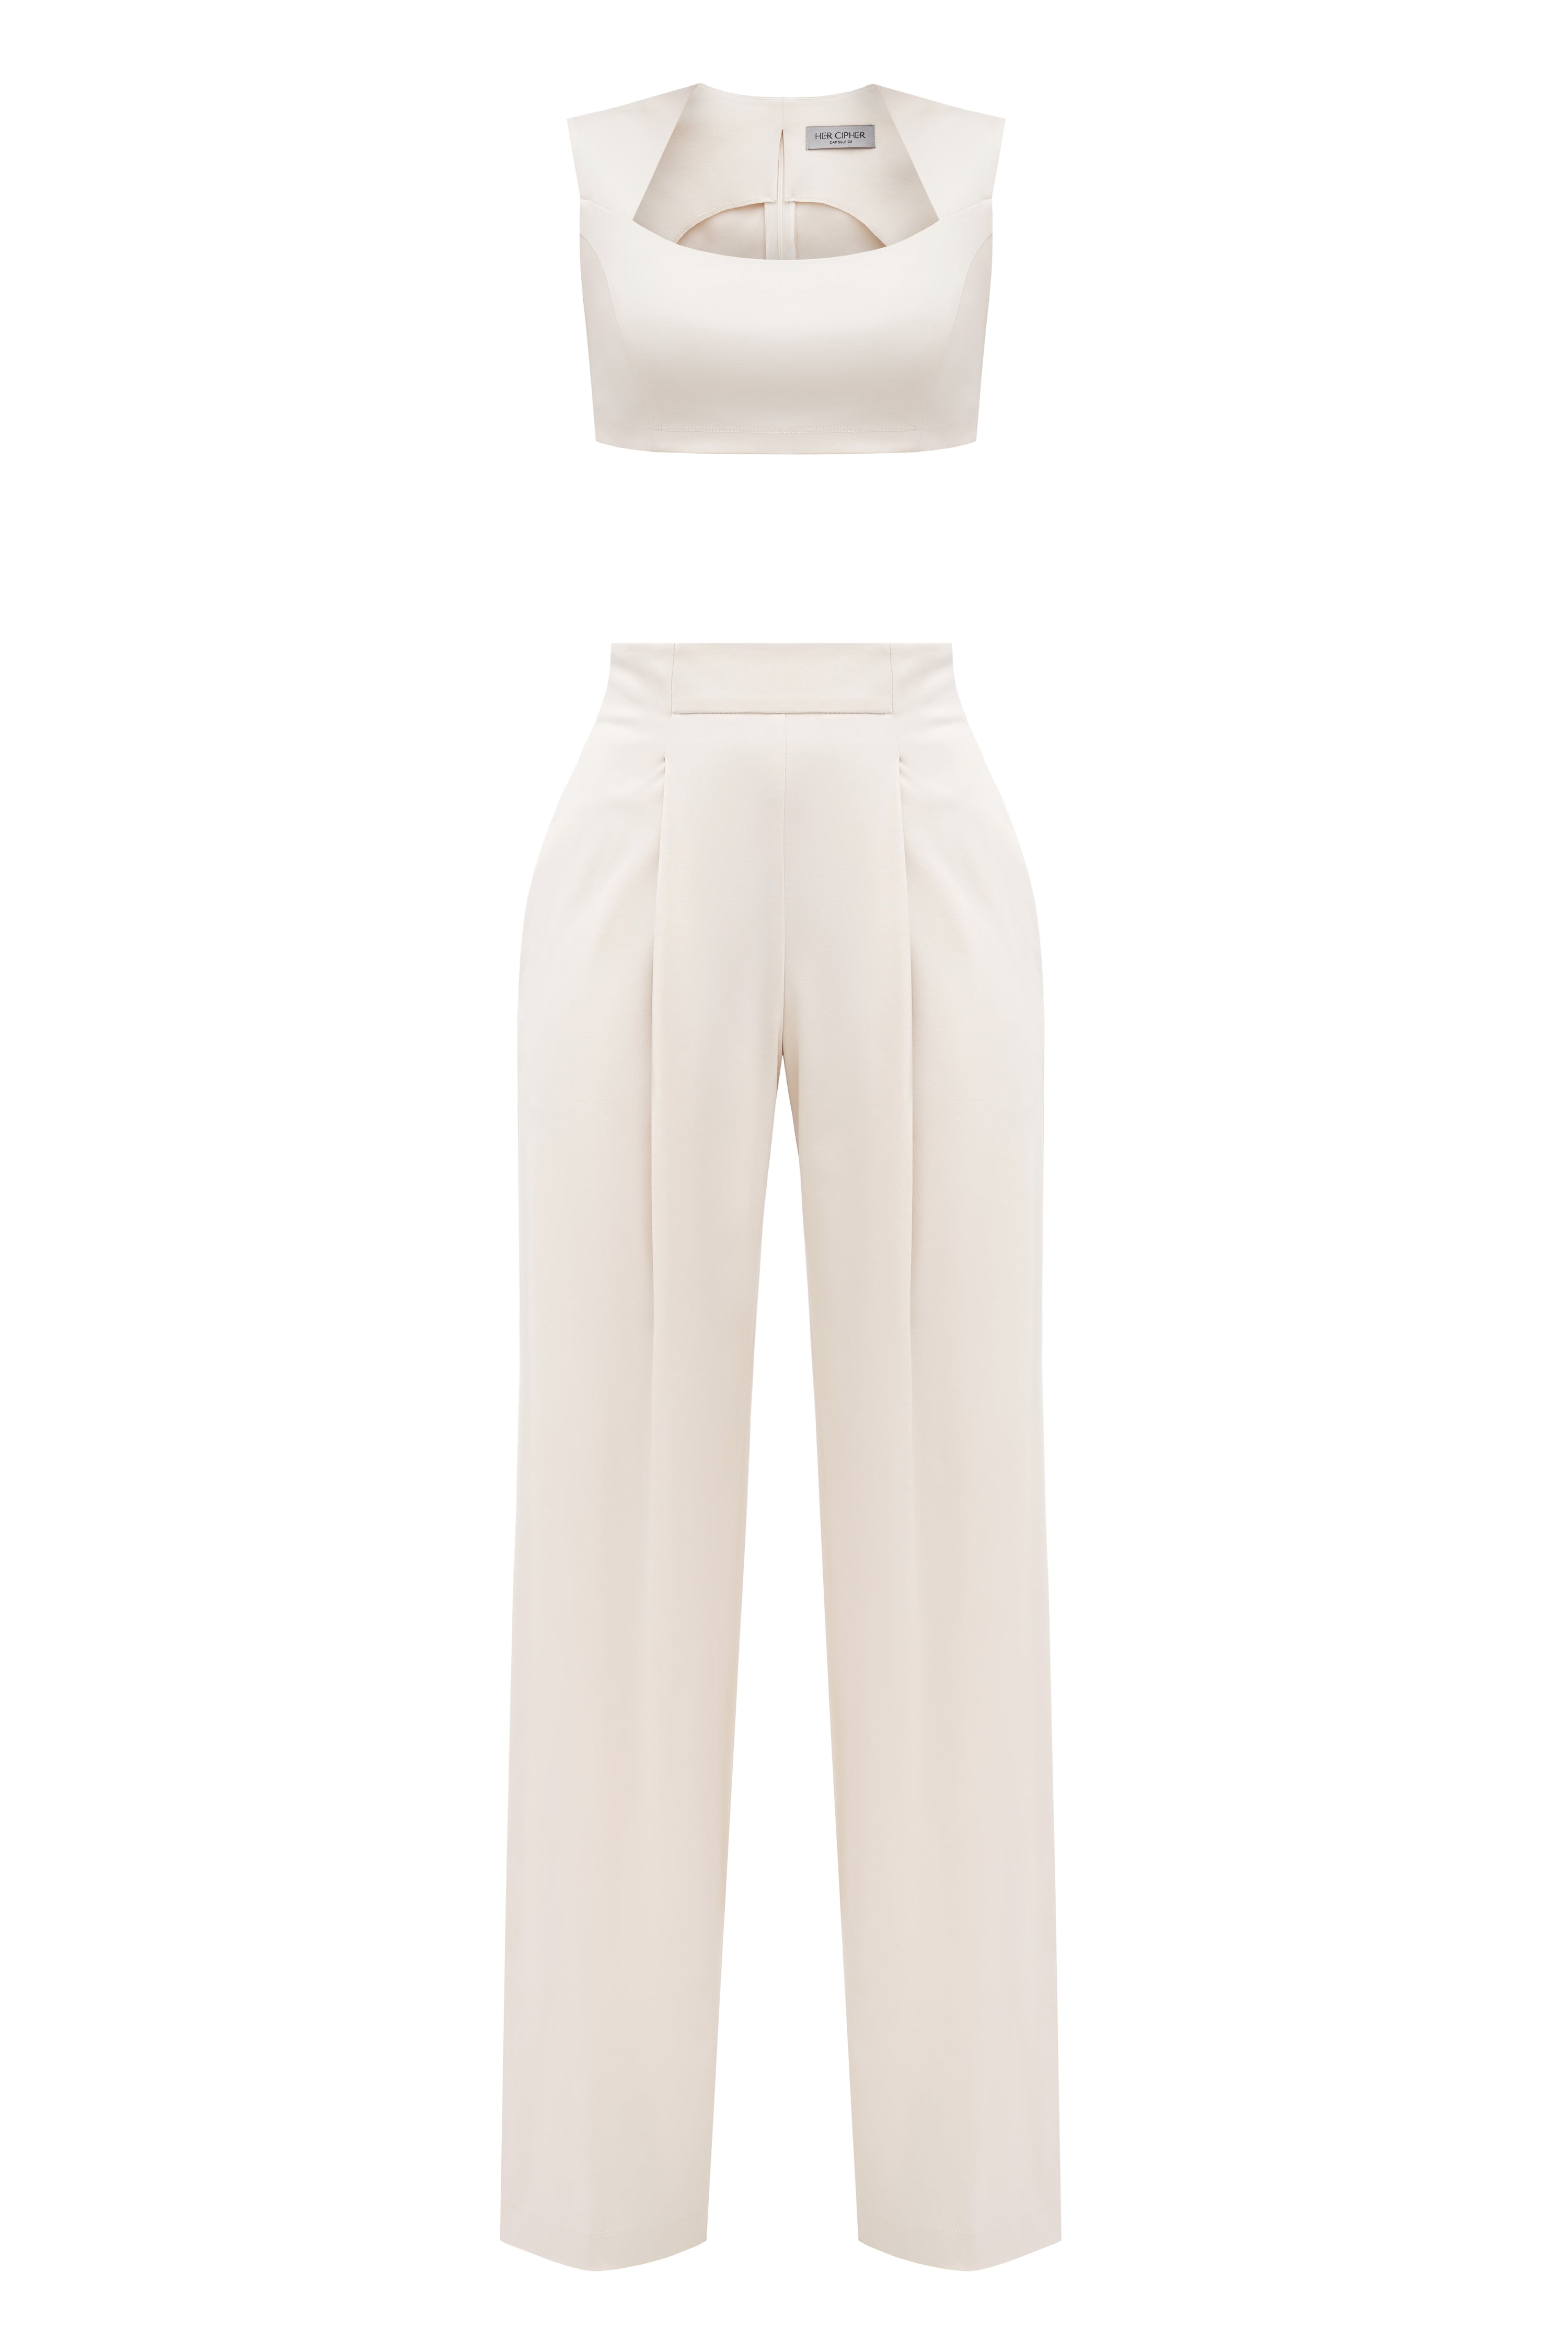 A set of organic cotton crop top and wide-leg pants created from 100% organic cotton interlock certified with GOTS